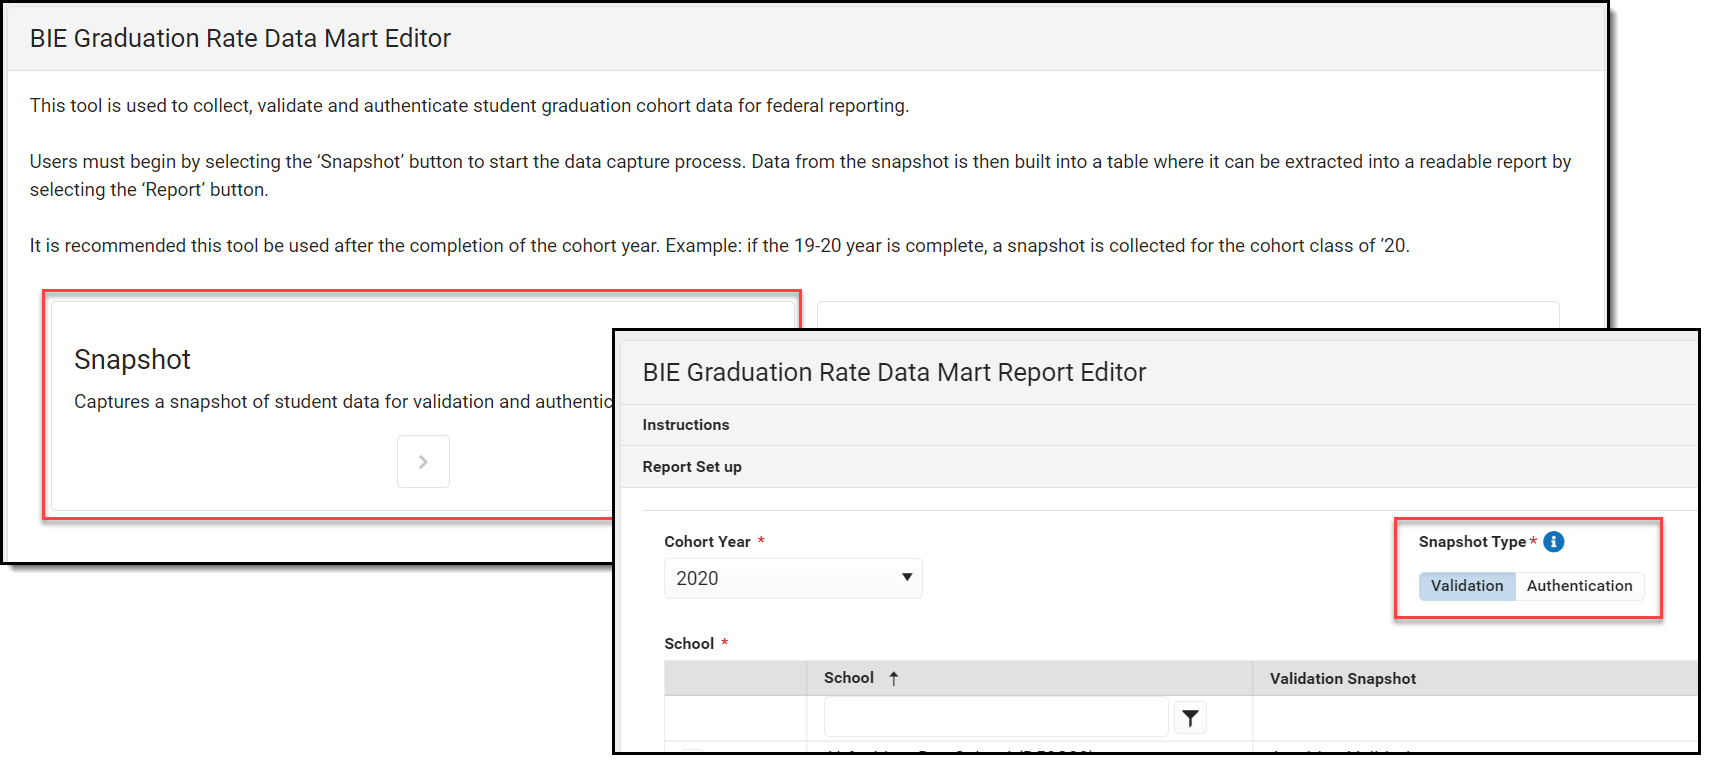 Screenshot of the Graduation Rate Data Mart Report Editor with snapshot types highlighted.